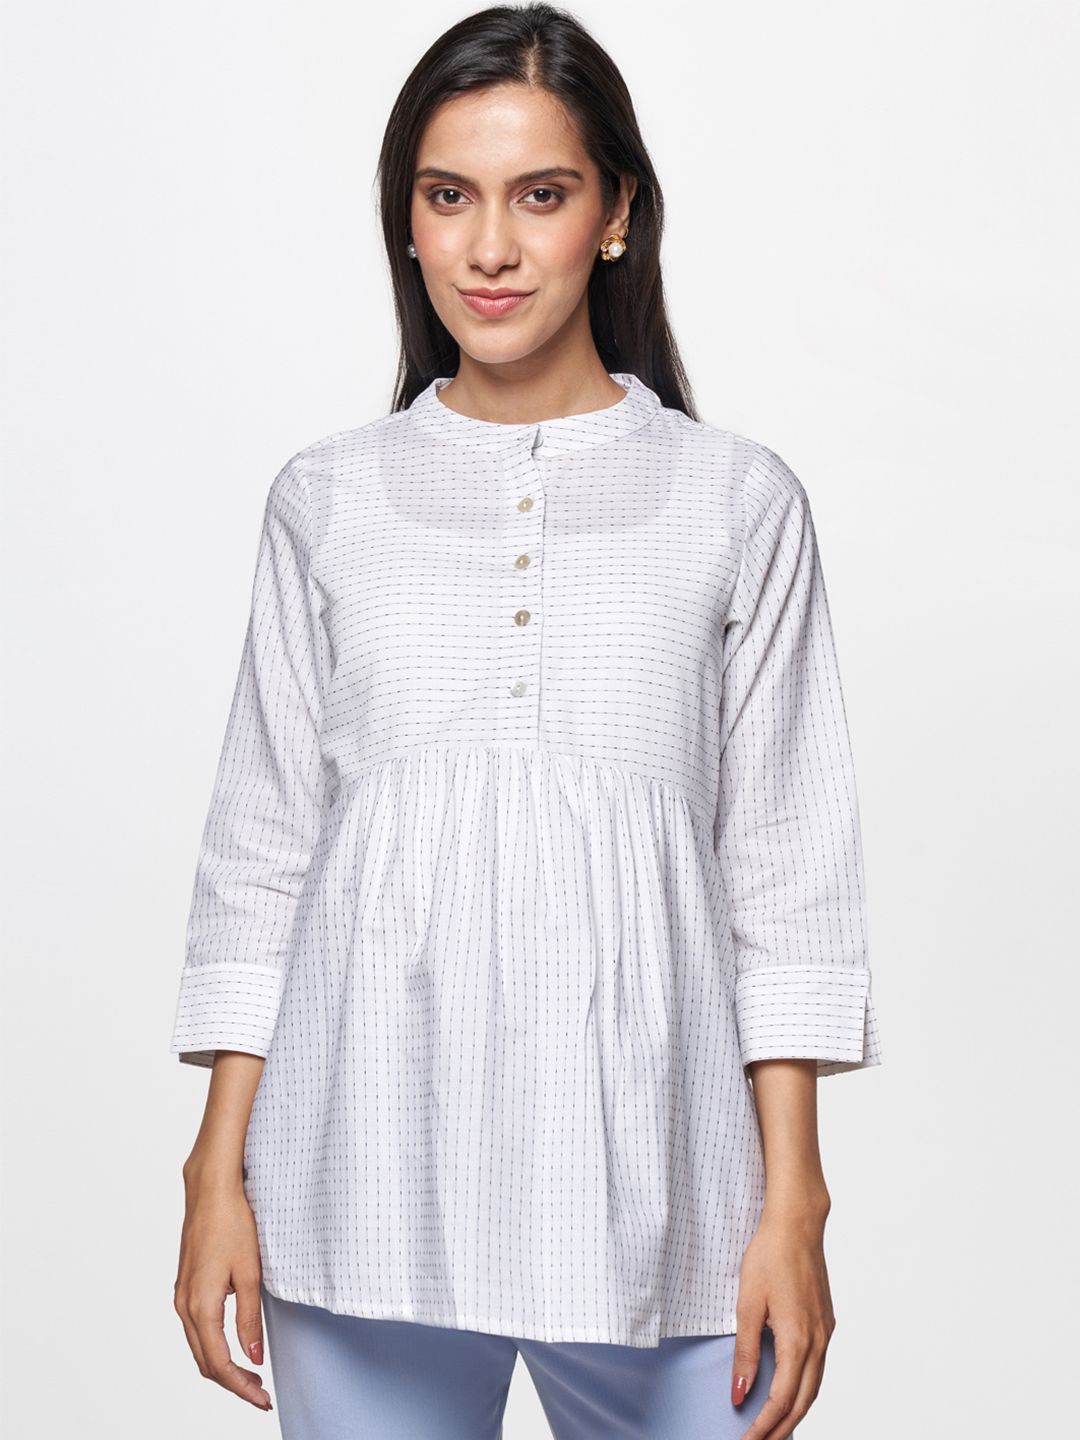 AND White & Grey Print Mandarin Collar Shirt Style Top Price in India